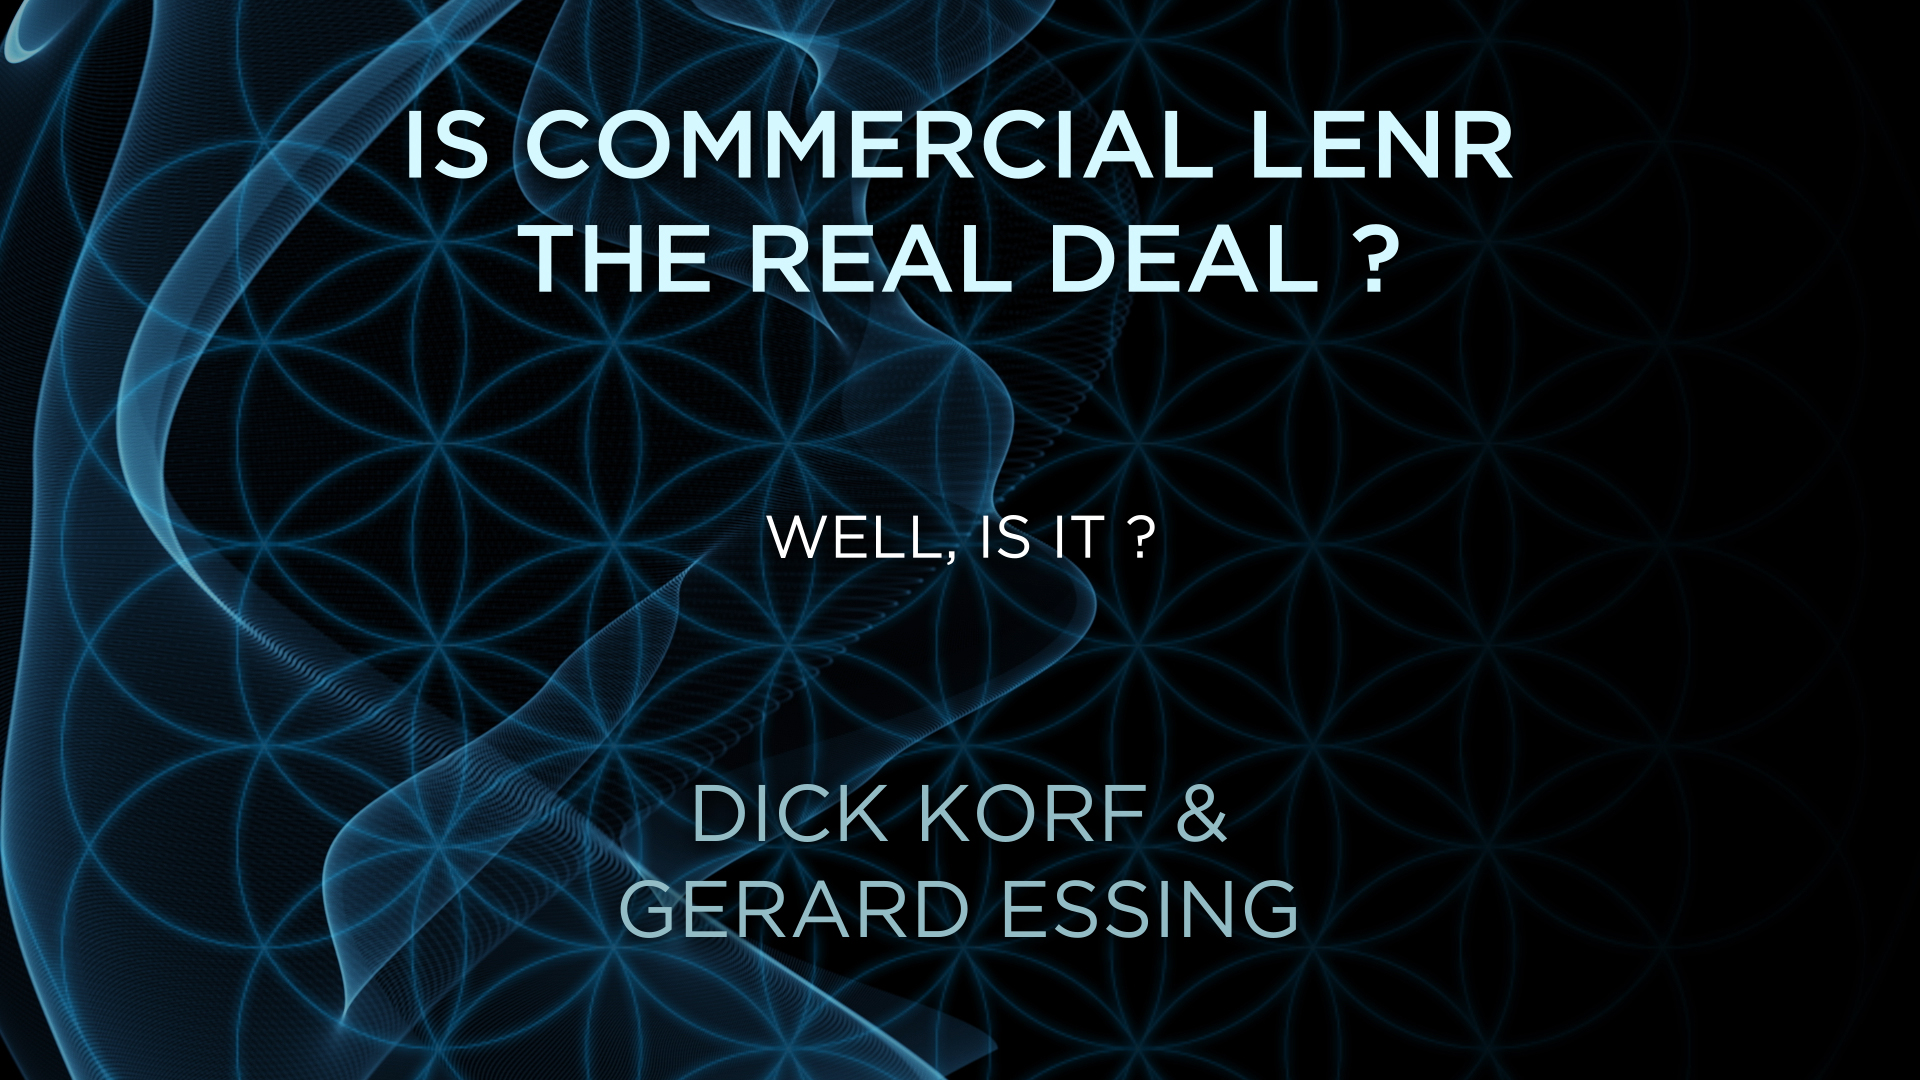 Dick Korf & Gerard Essing – Is LENR the Real Deal